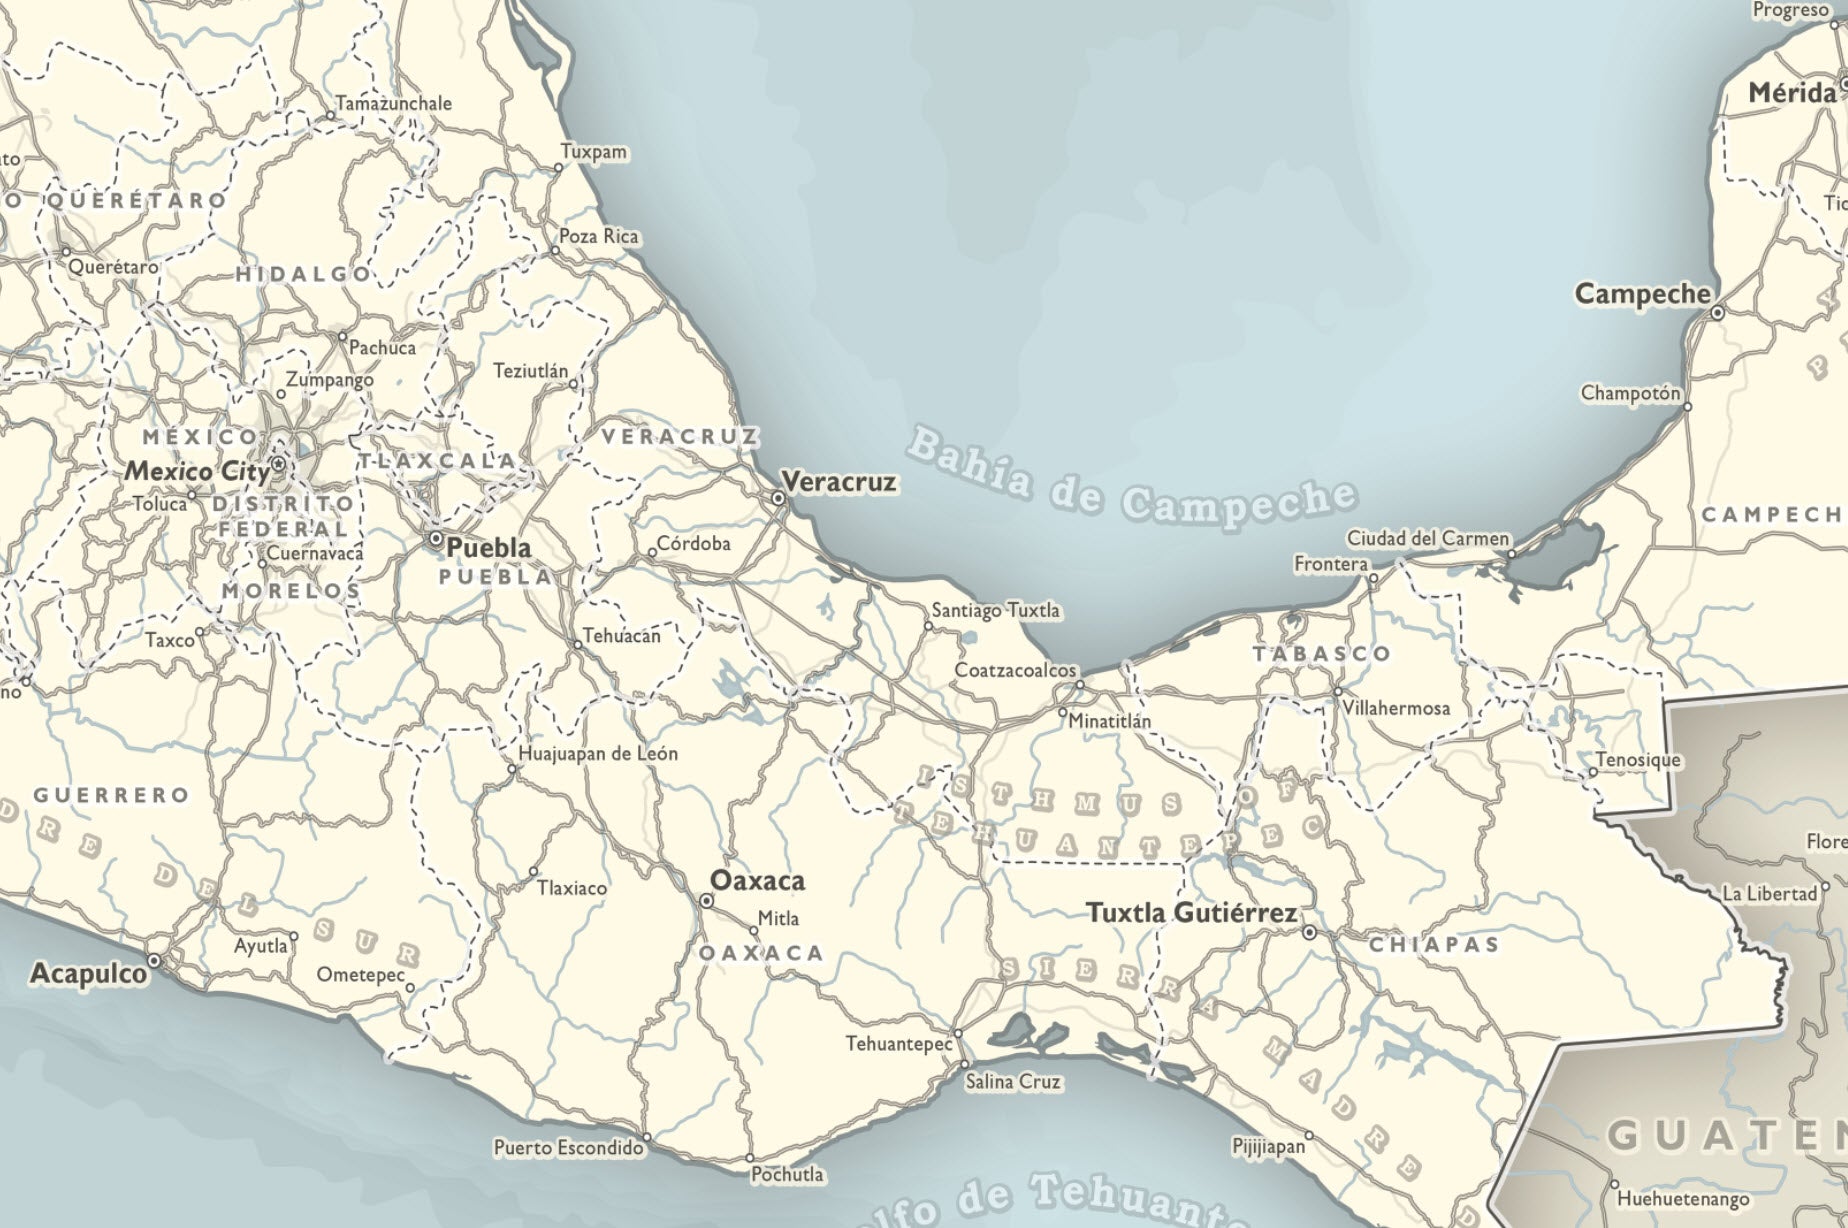 detailed view of southern mexico